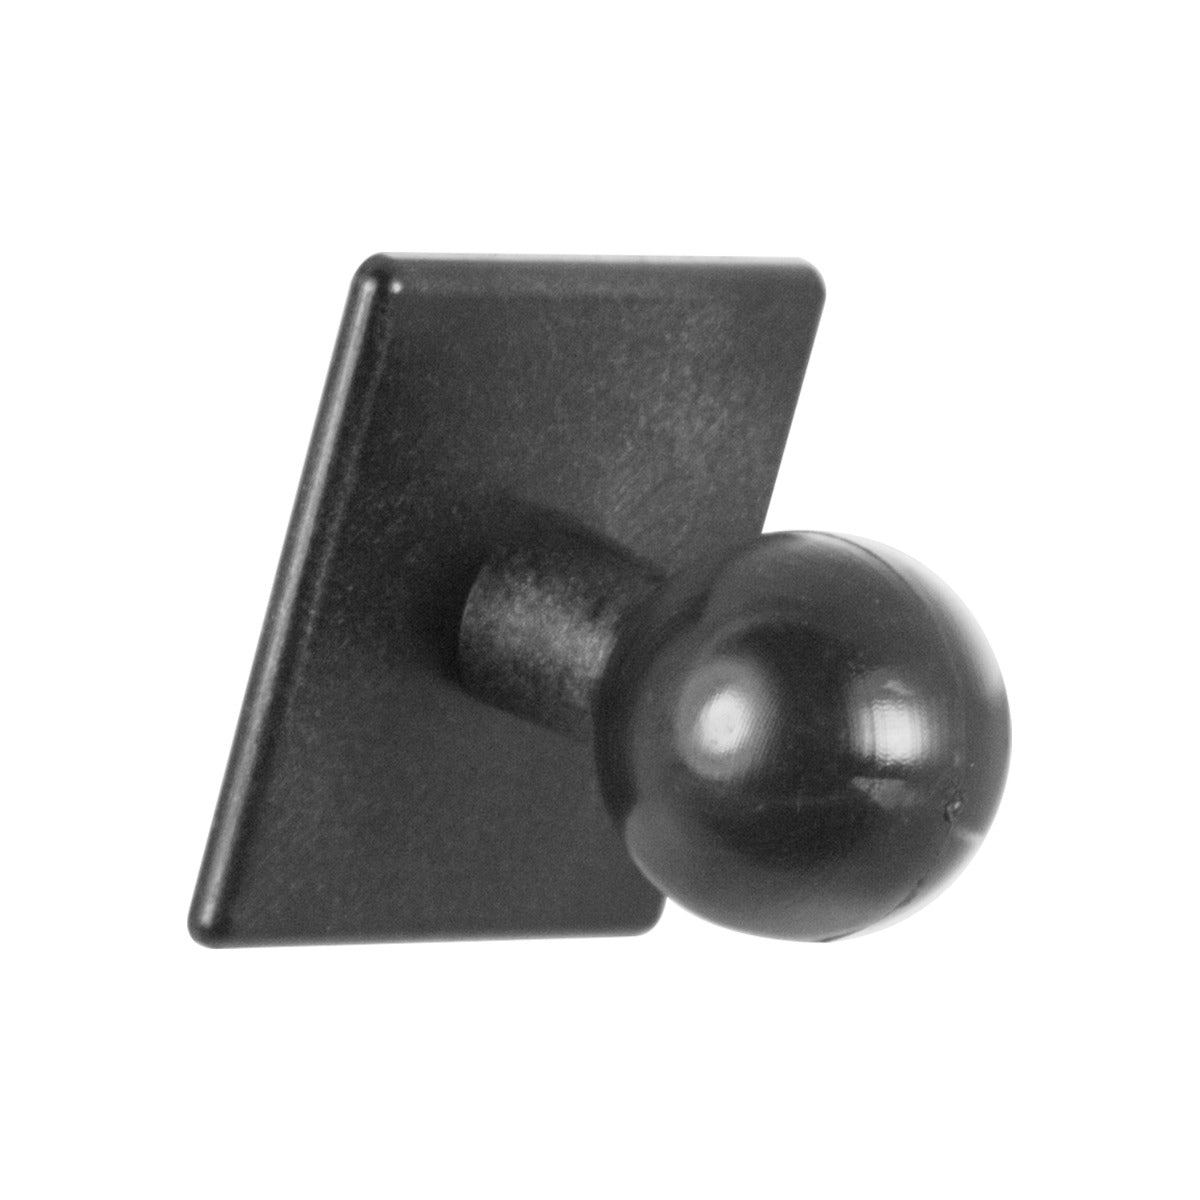 iBOLT™ 25mm / 1 inch/B Size to 4 Prong Composite Ball Adapter